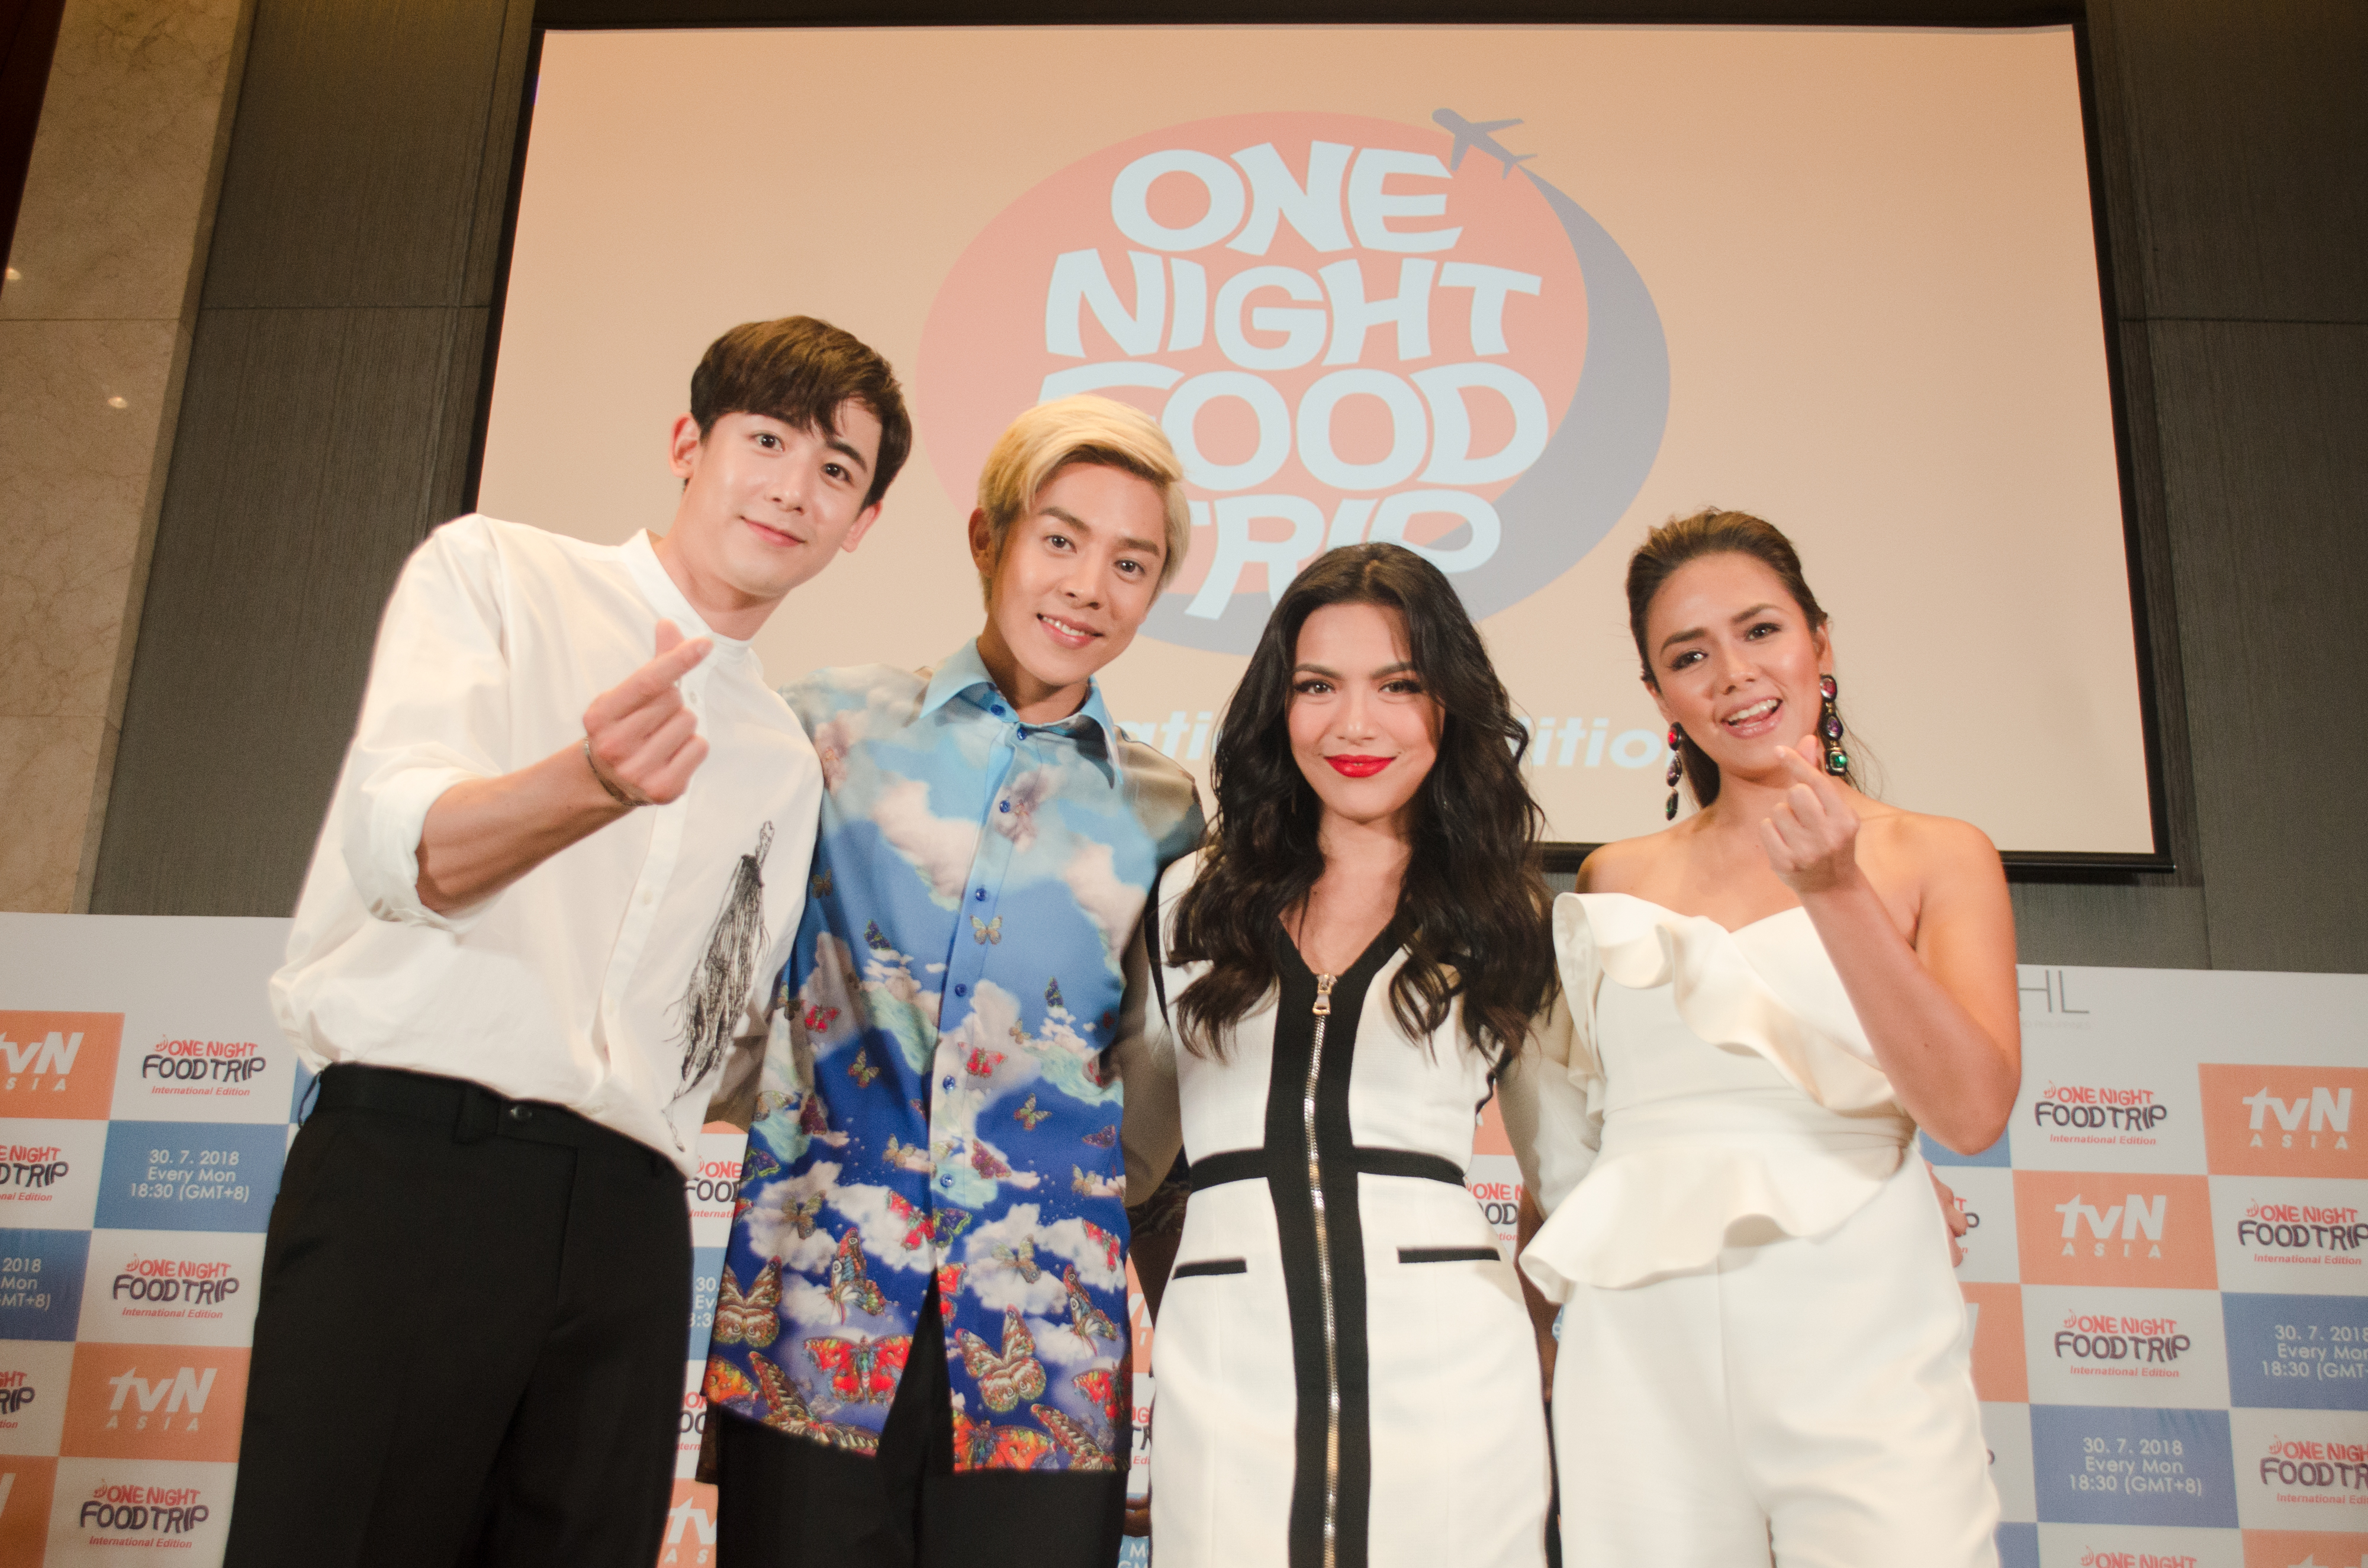 From left: rapper-songwriter Nichkhun from 2PM, singer-actor Alexander “Xander” Lee formerly of U-KISS, singer-actress Ciara Sotto, and celebrity chef Danica Sotto-Pingris